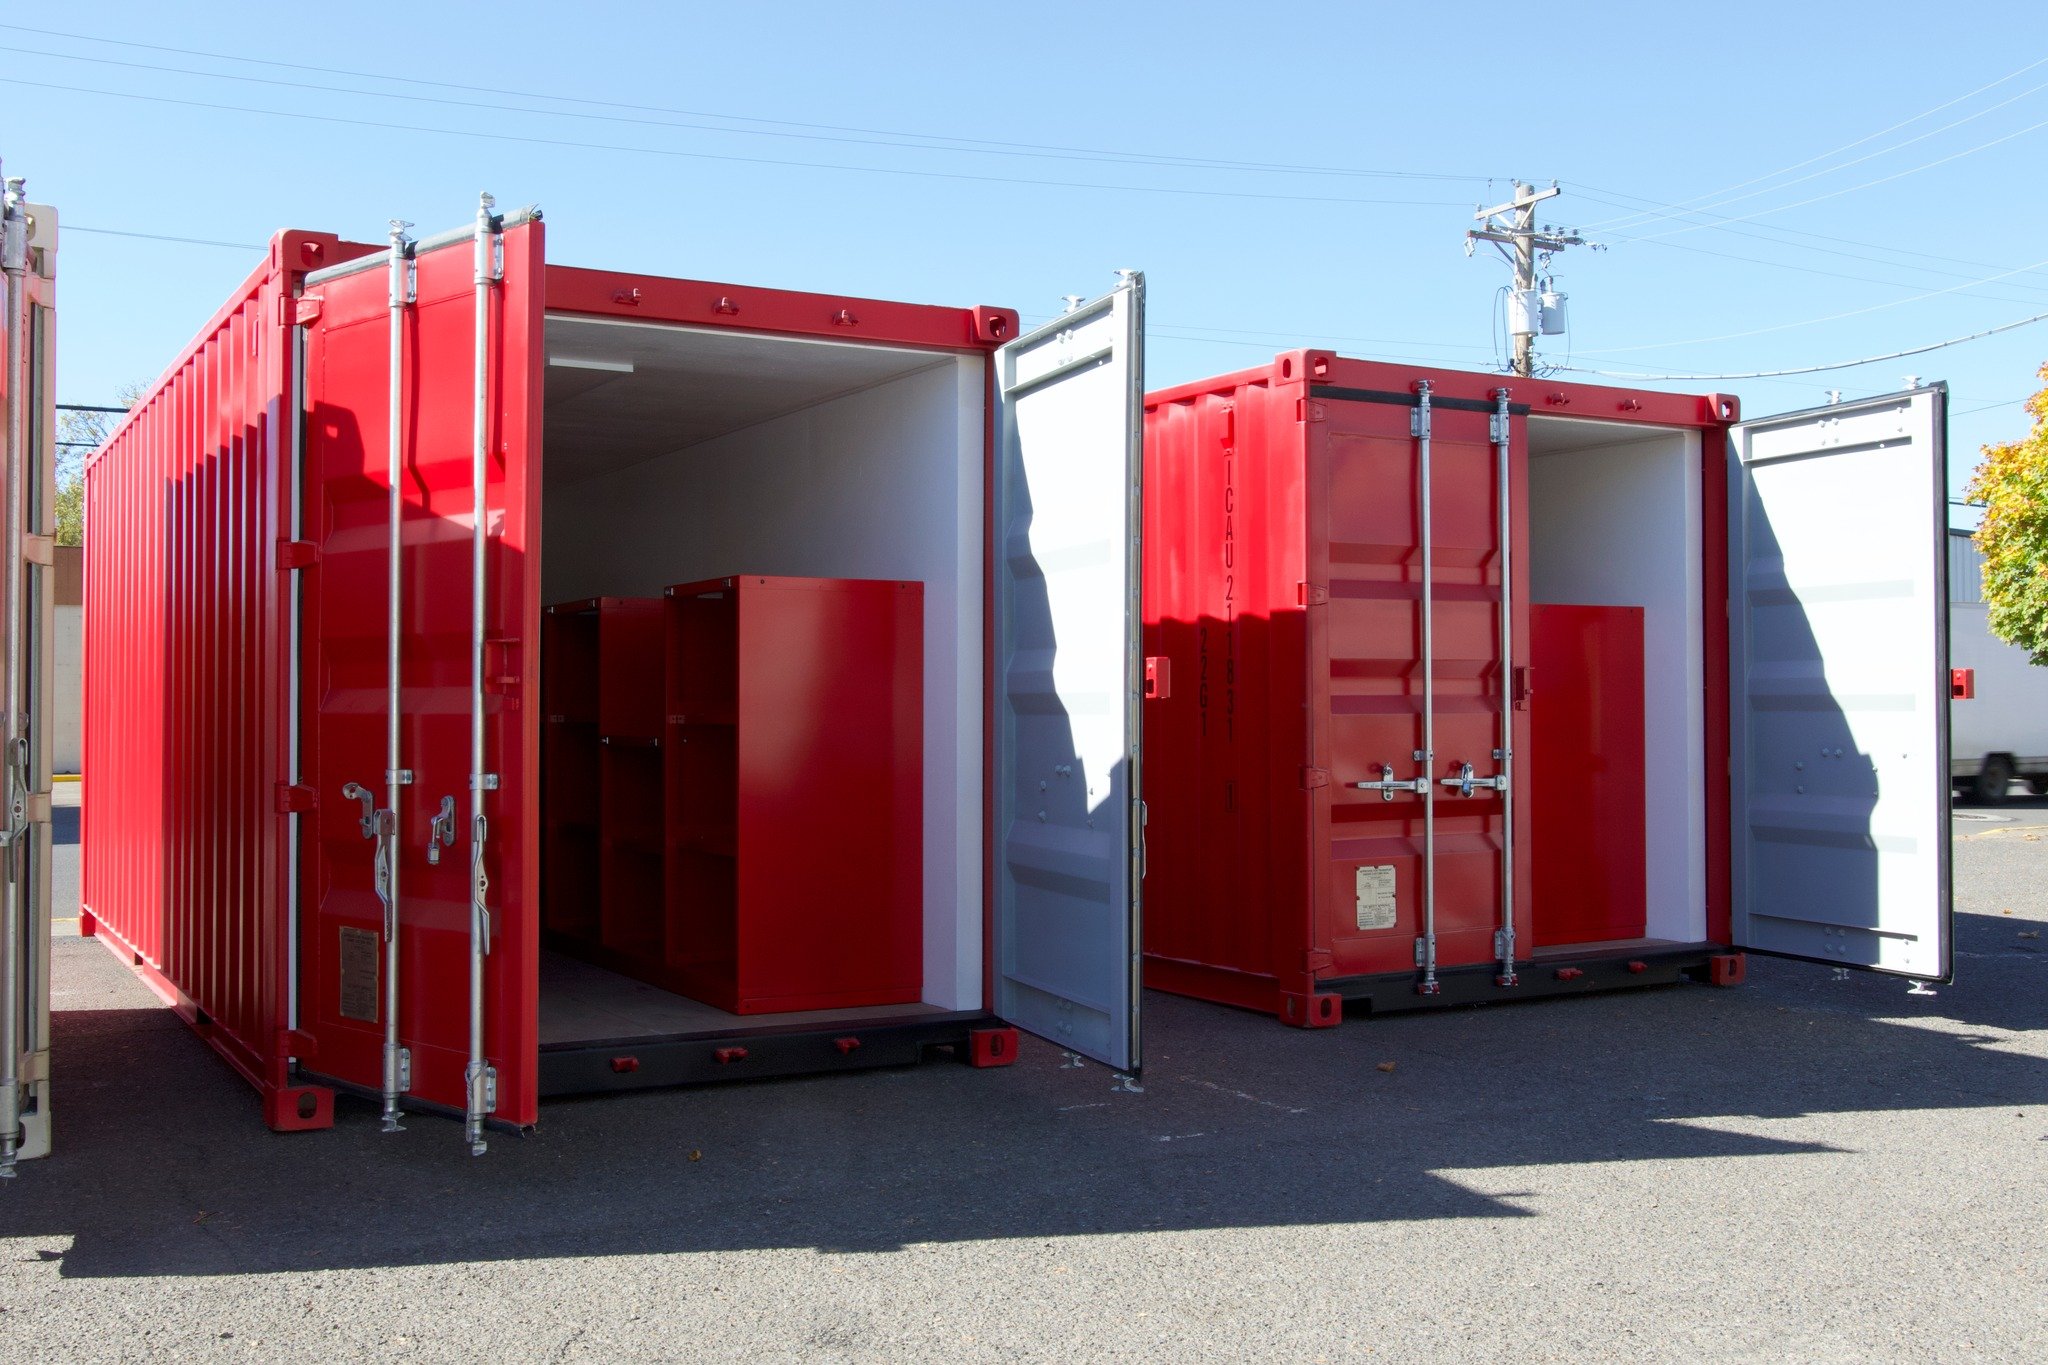 Upgrade your workspace with a customized tool storage container from Western Shelter!

Declutter your space, maximize efficiency, and keep your tools safe and sound.

#StopTheToolSearch
#CustomizedStorage
#WesternShelter